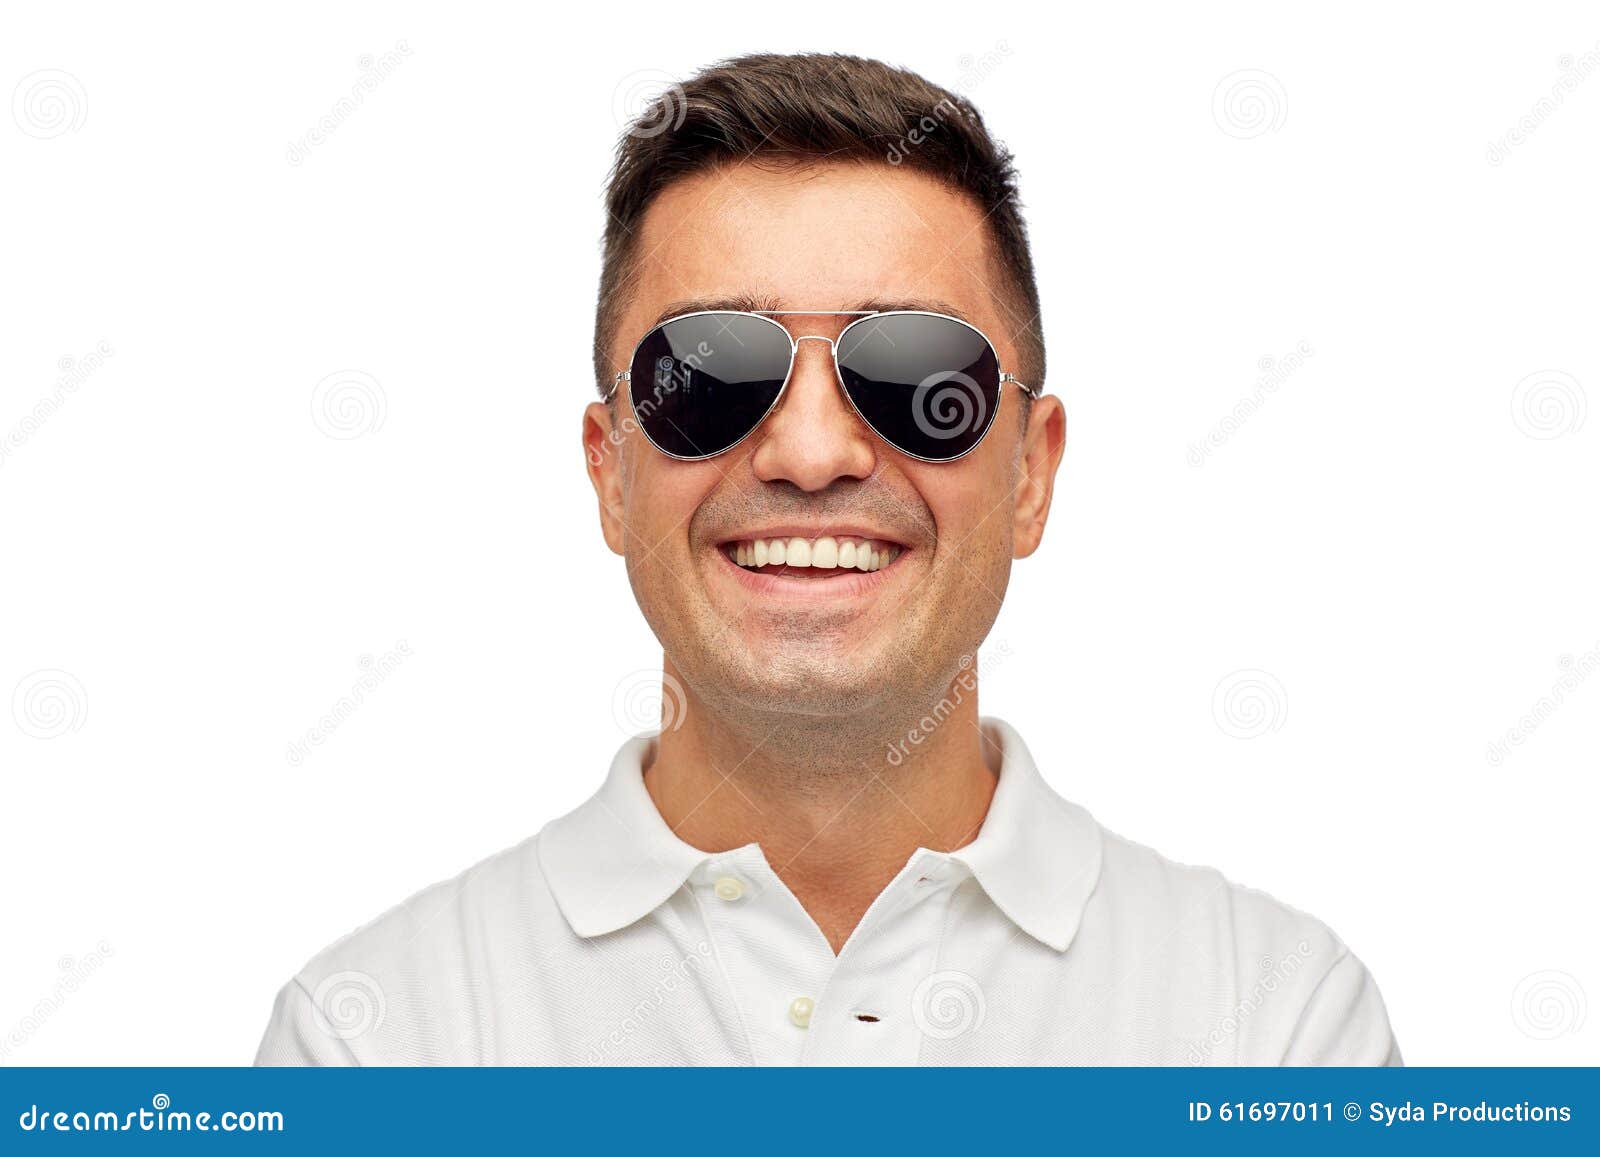 Face of Smiling Man in Polo T-shirt and Sunglasses Stock Image - Image ...